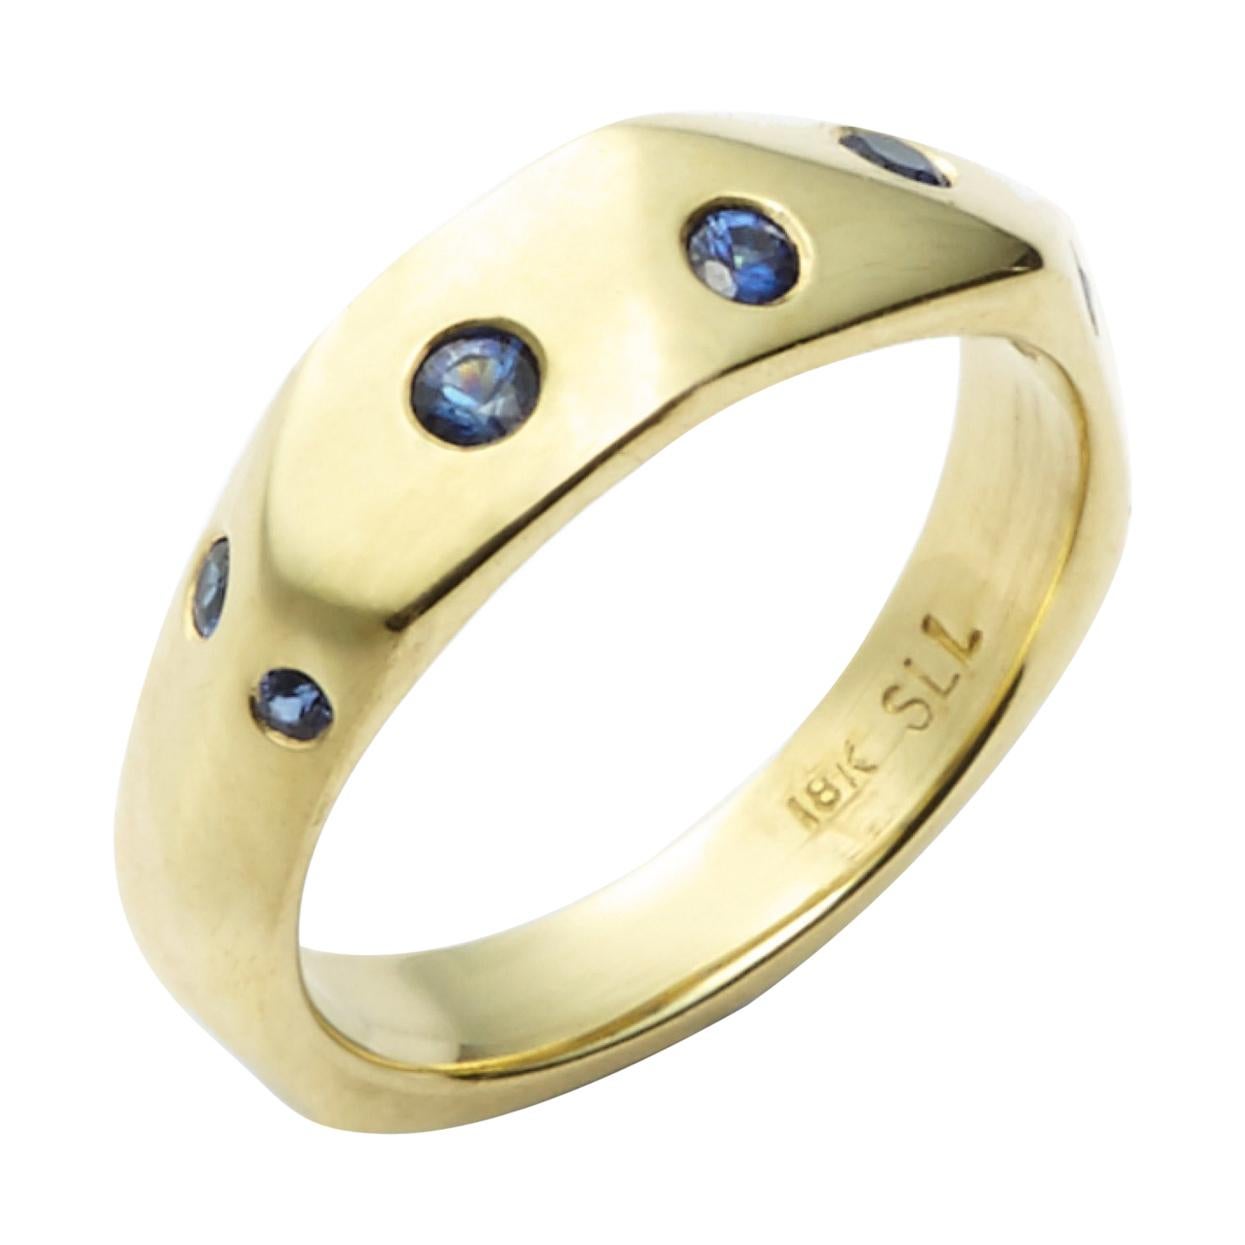 Susan Lister Locke The Diana Band with 0.30 Carat Sapphires in 18 Karat Gold For Sale